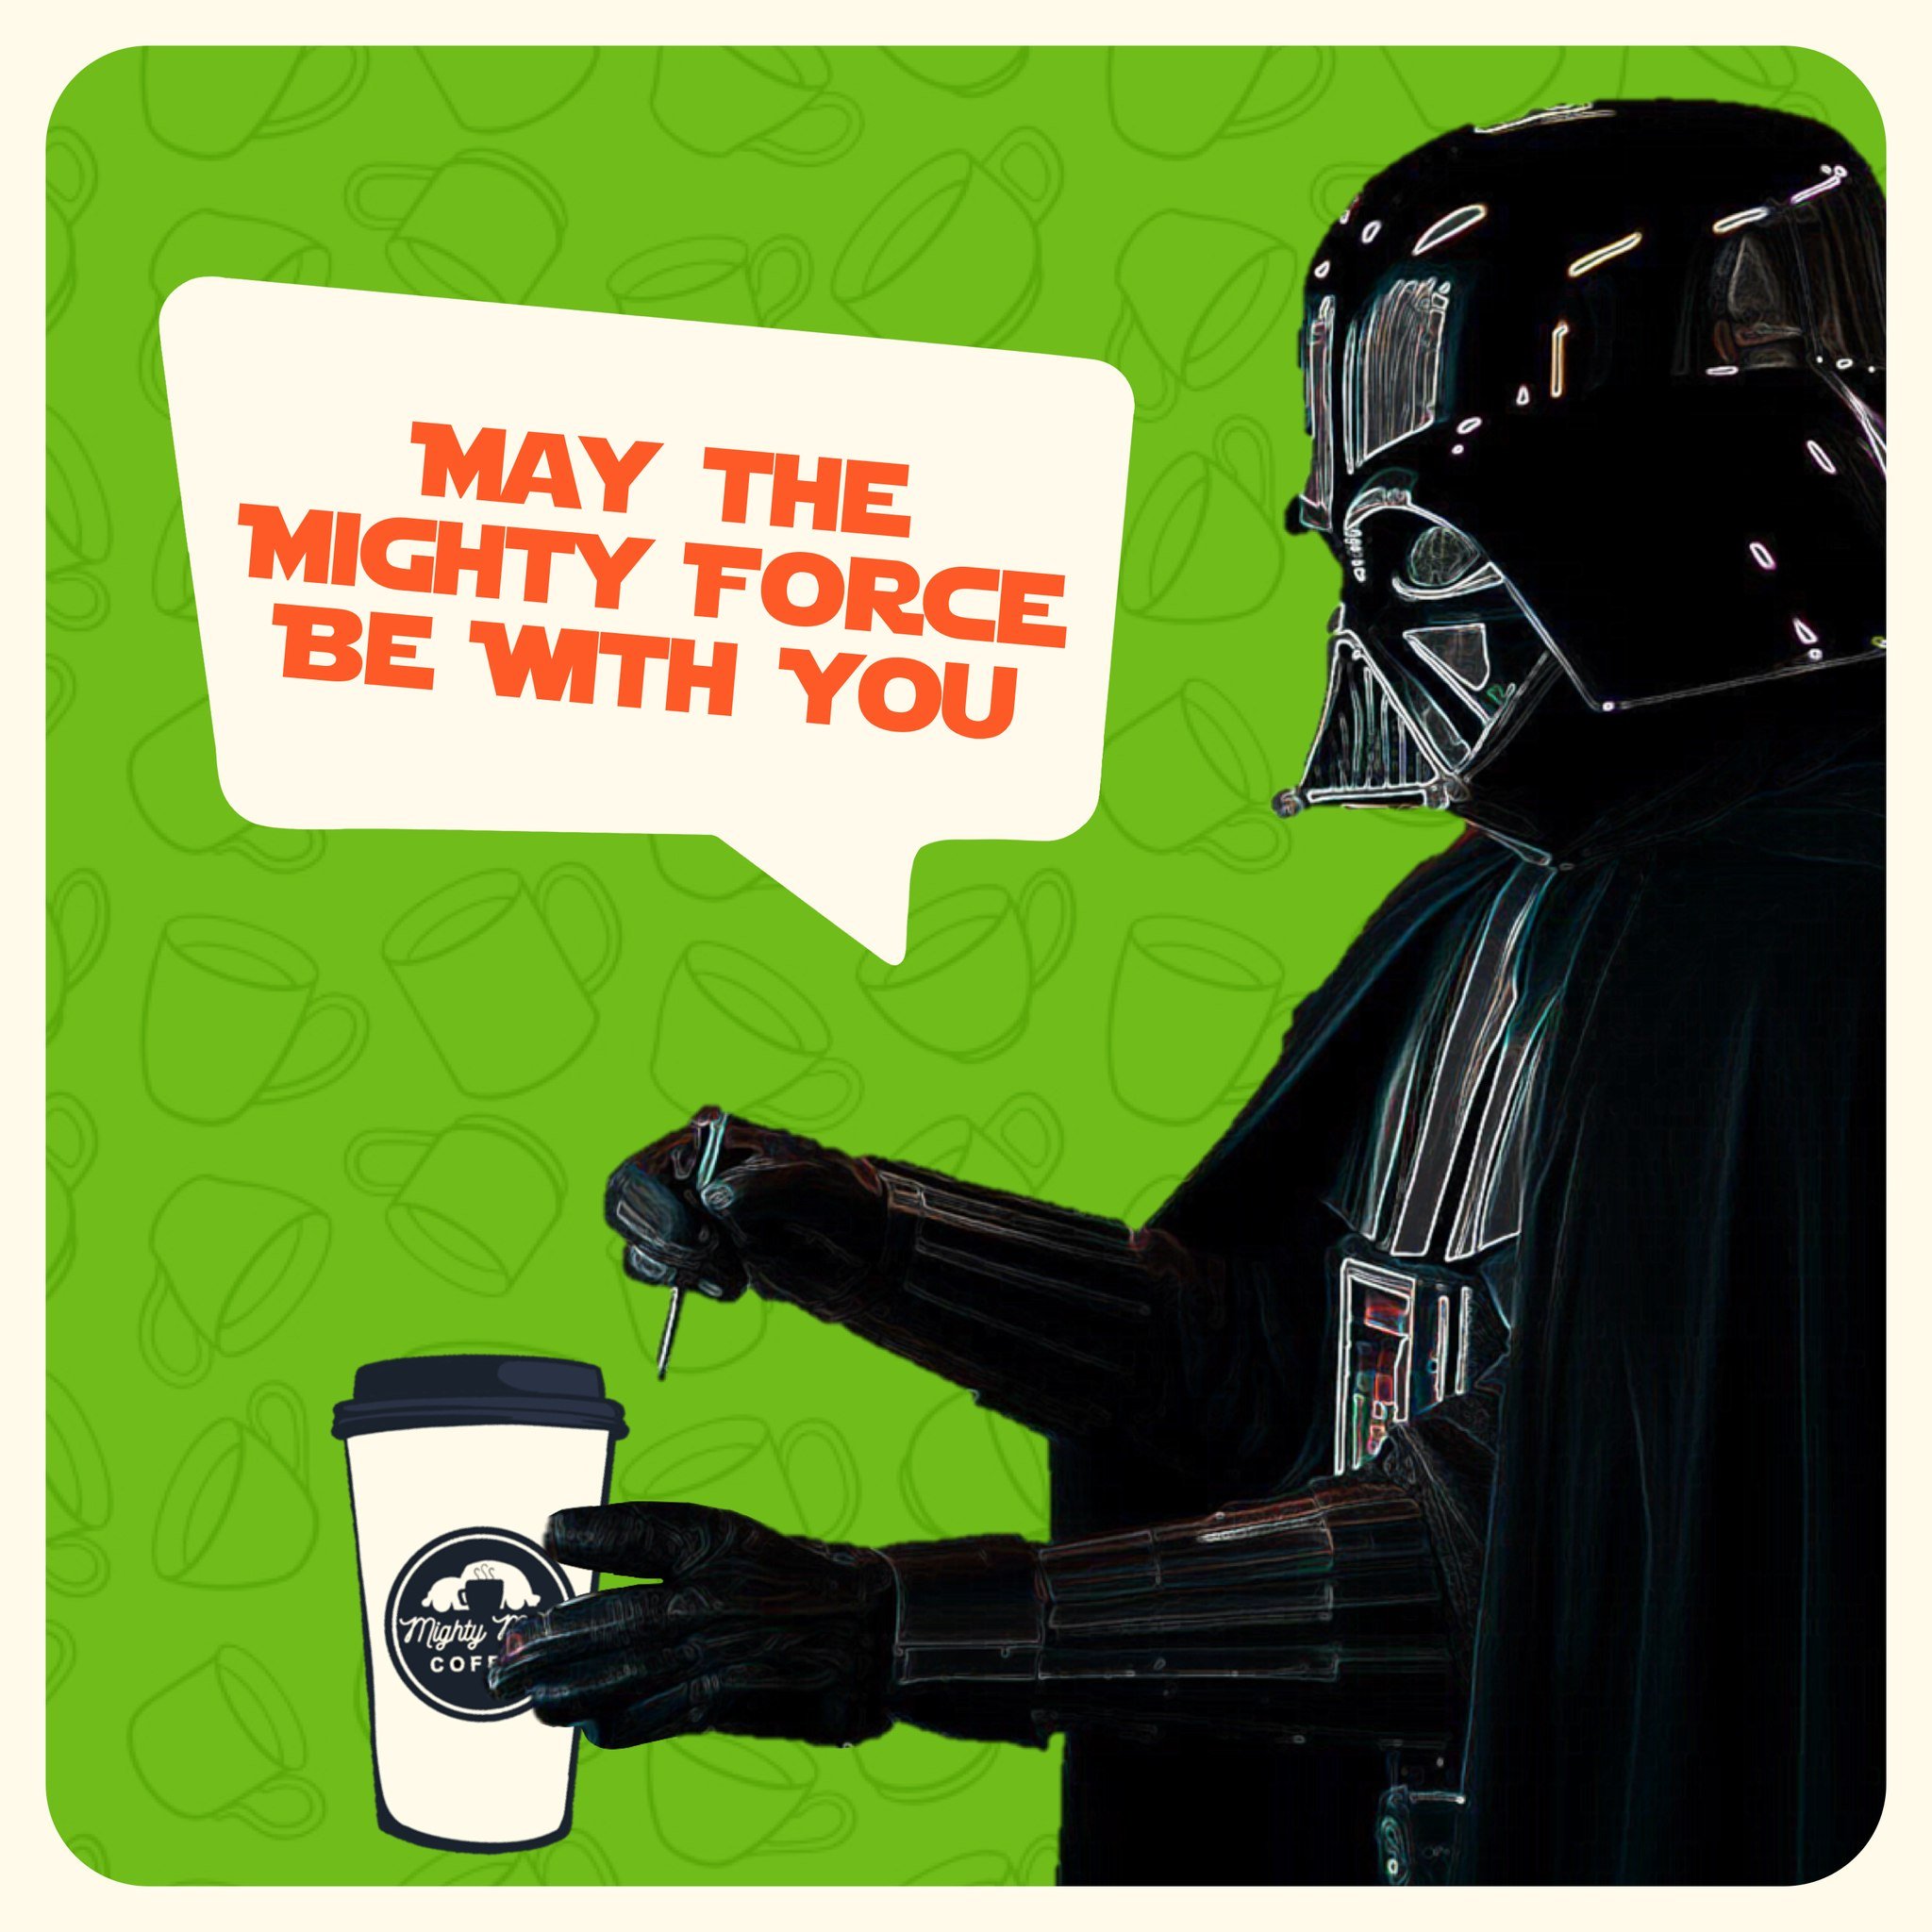 May the Fourth Be With You today and this whole weekend!
HAPPY STAR WARS DAY!
Some fun daily specials at all our locations this weekend so pop by to be one with the force!

#starwarsday #may4th #may4thbewithyou #starwarsdrinks #darthvader #coffeeaddi